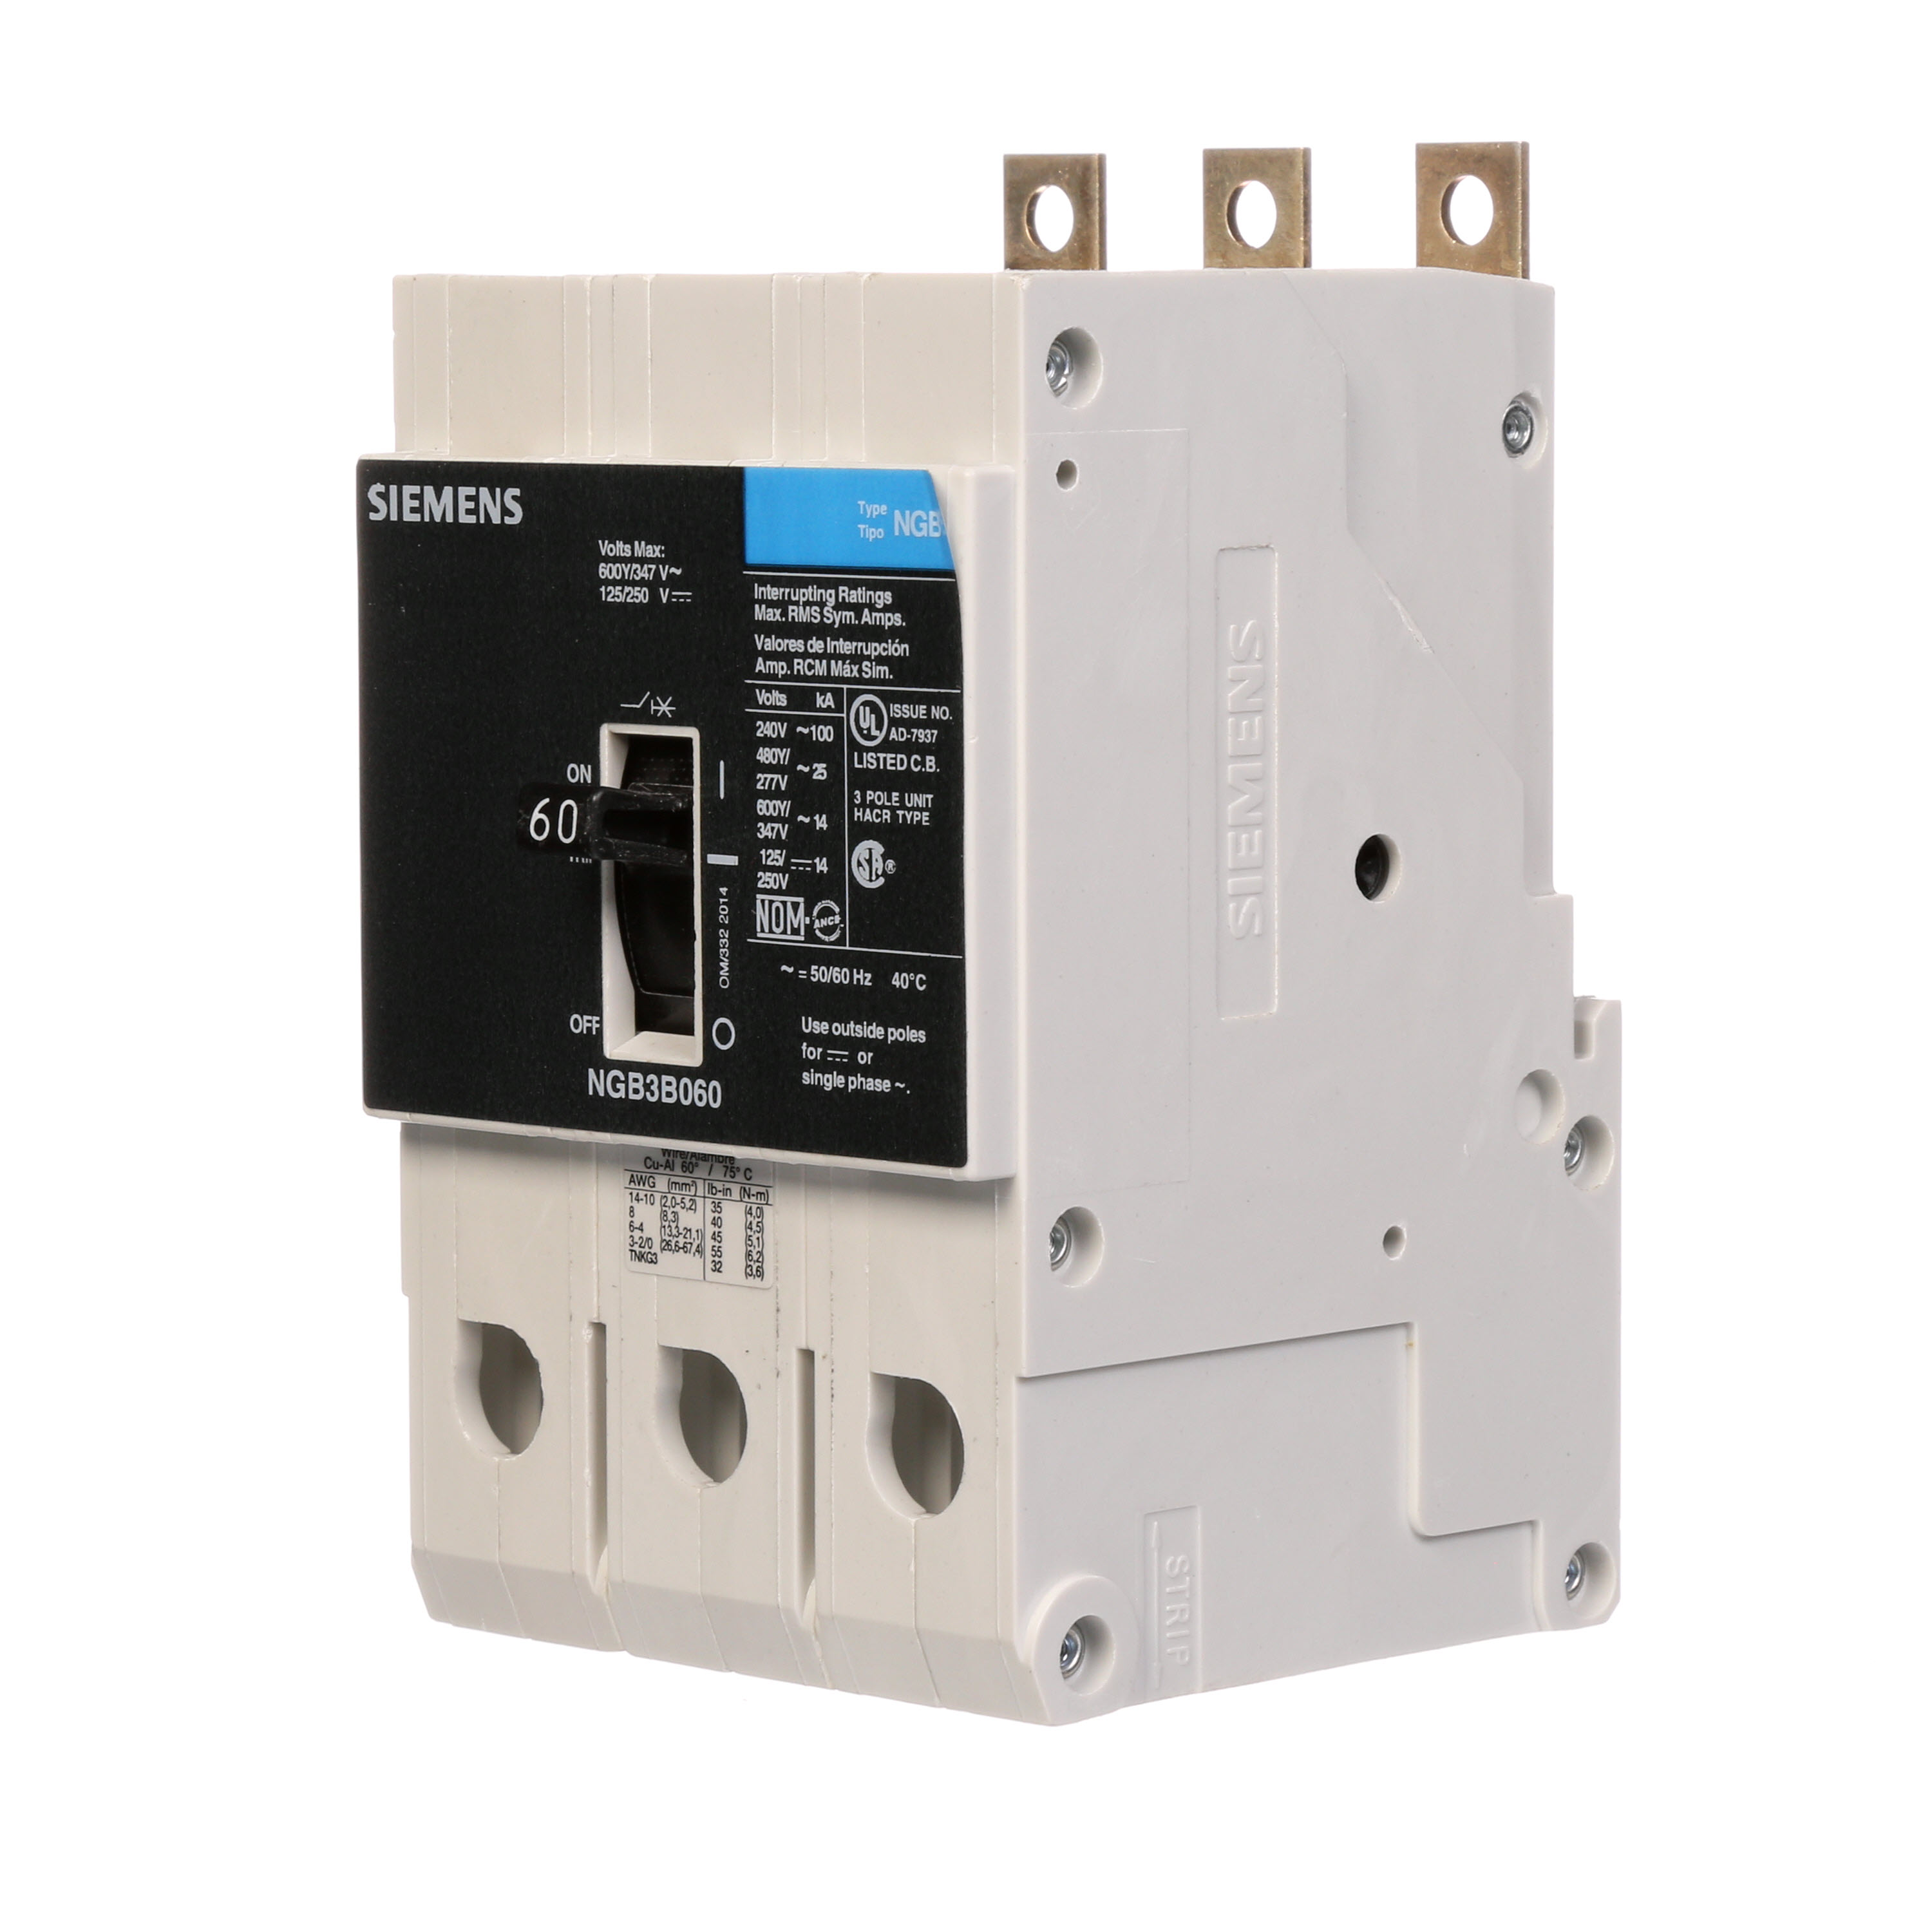 SIEMENS LOW VOLTAGE PANELBOARD MOUNT G FRAME CIRCUIT BREAKER WITH THERMAL - MAGNETIC TRIP. UL LISTED NGB FRAME WITH STANDARD BREAKING CAPACITY. 60A 3-POLE (14KAIC AT 600Y/347V) (25KAIC AT 480Y/277V). SPECIAL FEATURES MOUNTS ON PANELBOARD, LOAD SIDE LUGS ONLY (TC1GG20) WIRE RANGE 8 - 1/0 AWS (CU/AL). DIMENSIONS (W x H x D) IN 3 x 5.4 x 2.8.